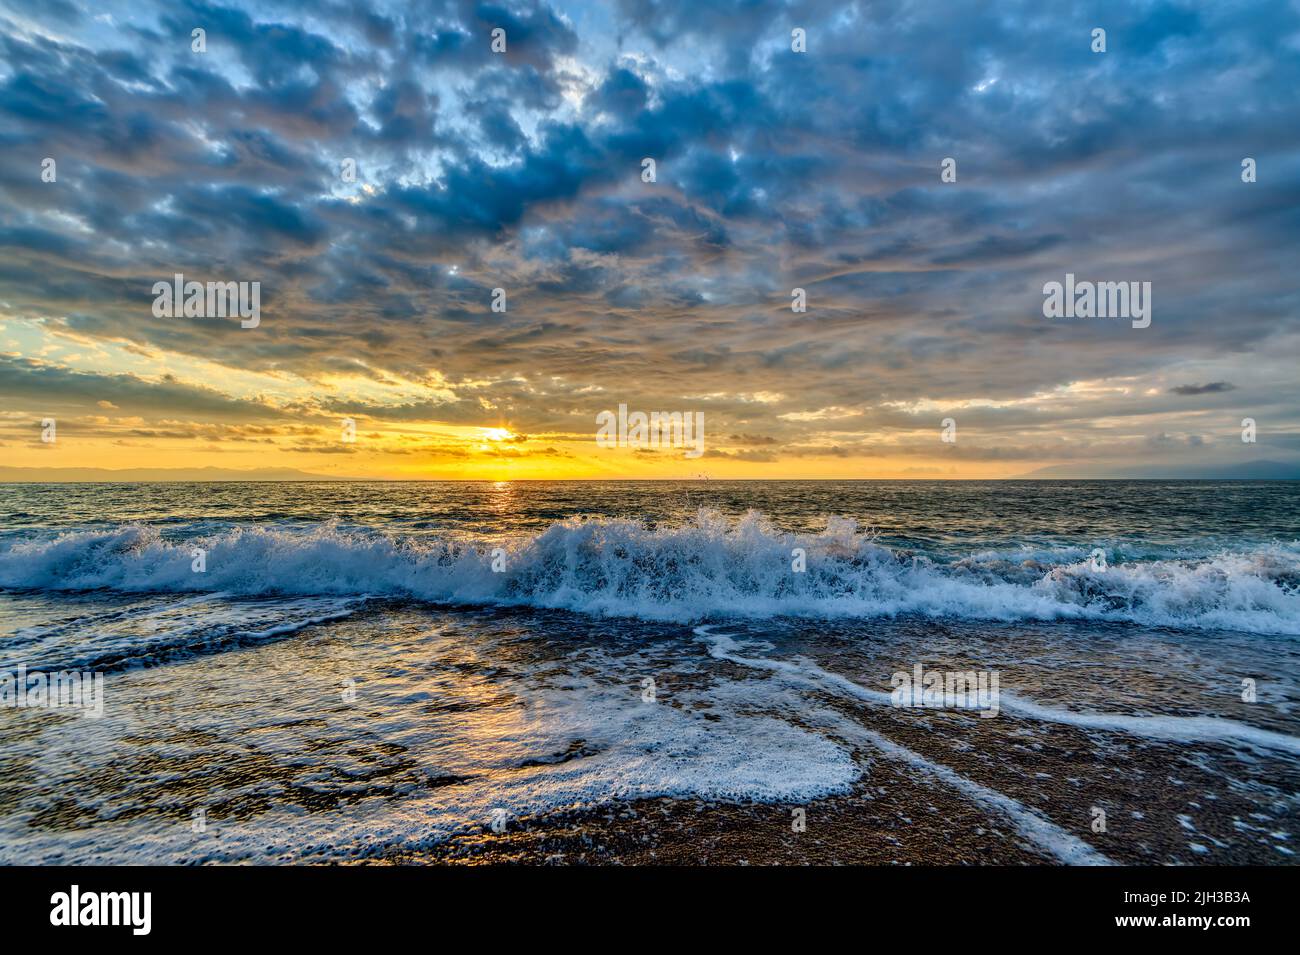 An Ocean Wave Is Breaking Against A Colorful Sunset Sky Stock Photo